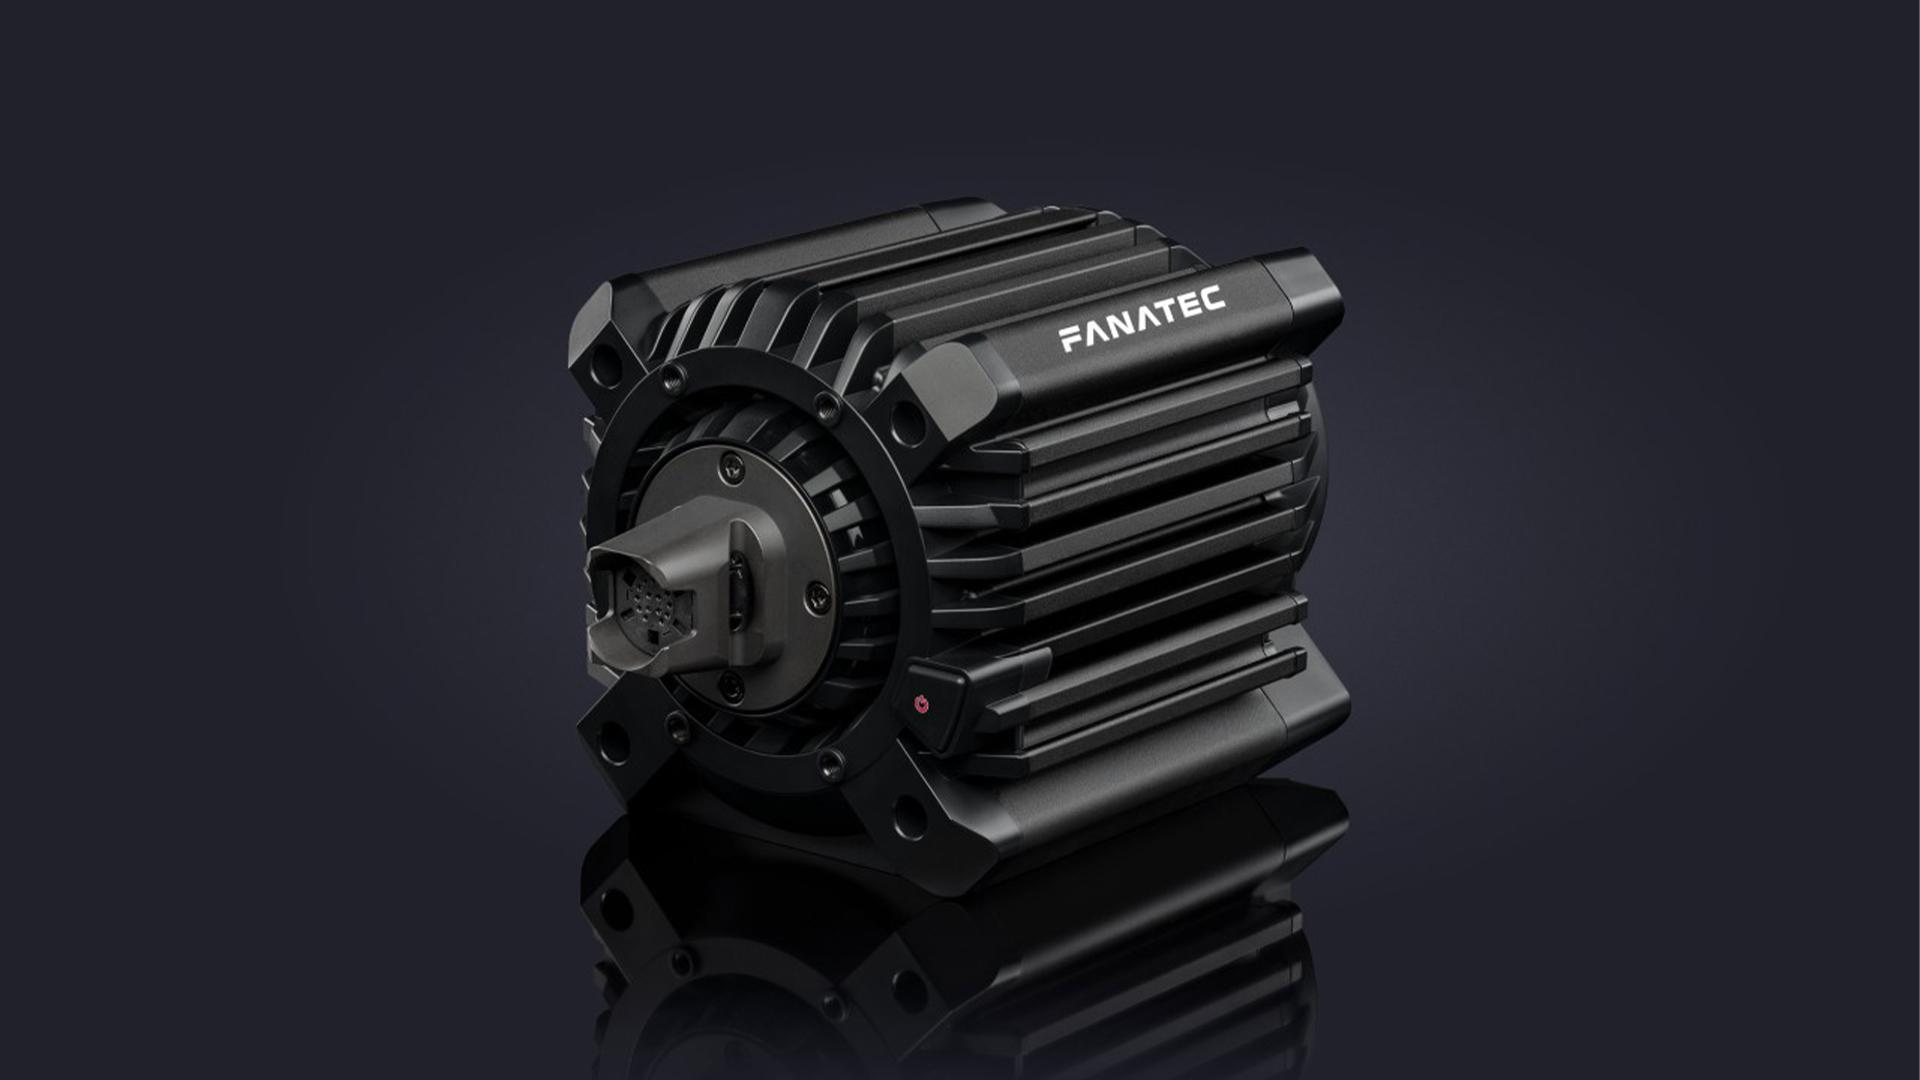 Fanatec revives the ClubSport wheel base as a 12Nm direct drive